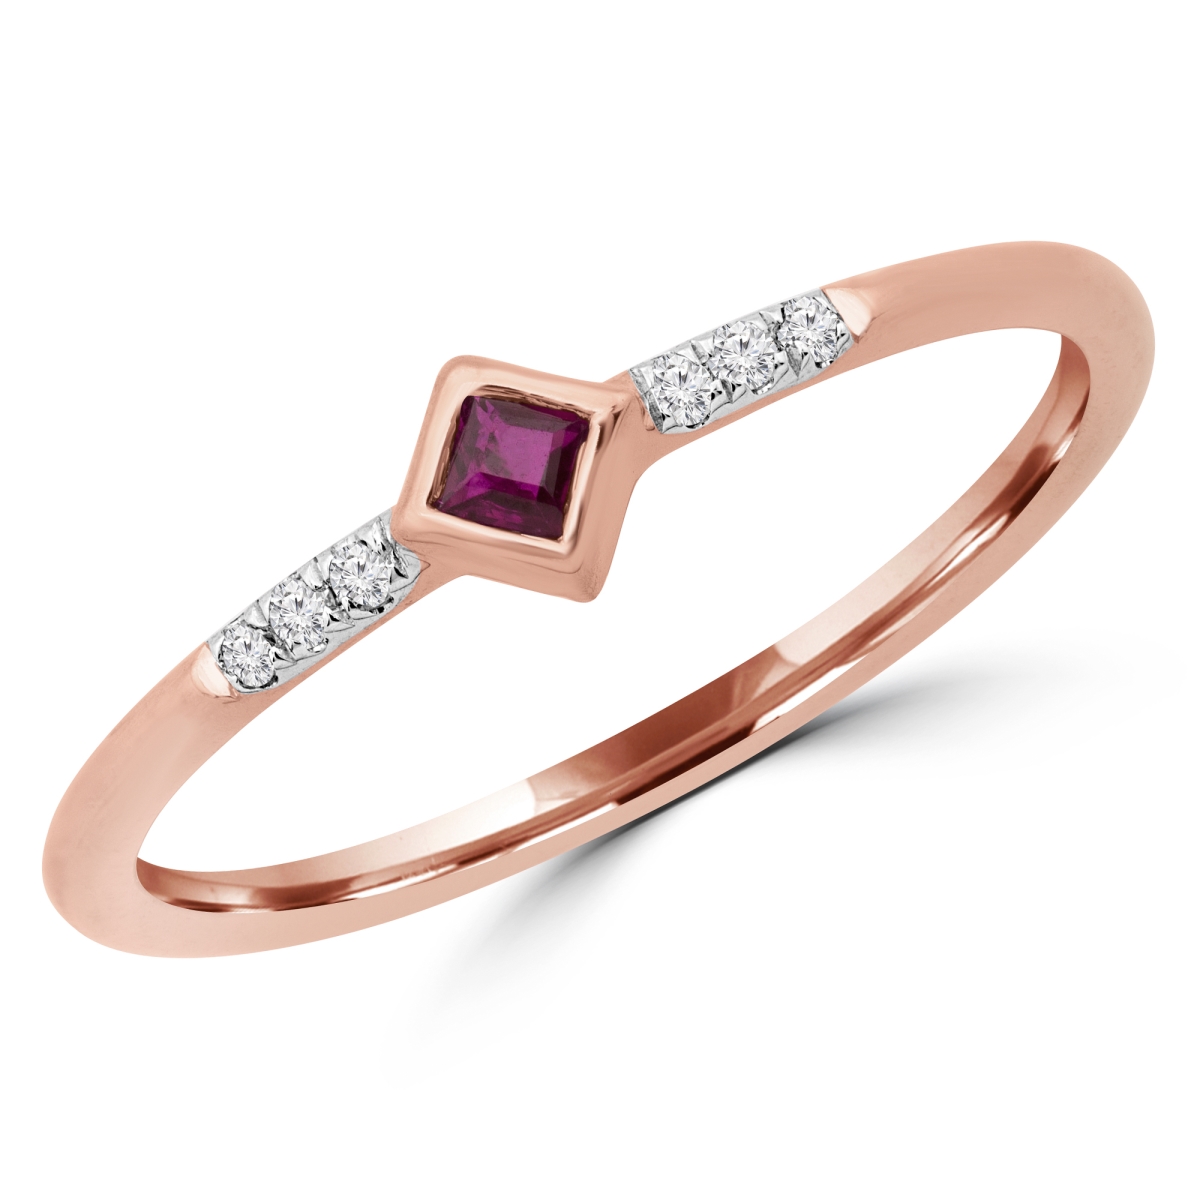 Picture of Majesty Diamonds MDR190078-9 0.1 CTW Round Red Ruby Bezel Set Cocktail Ring in 14K Rose Gold - Size 9